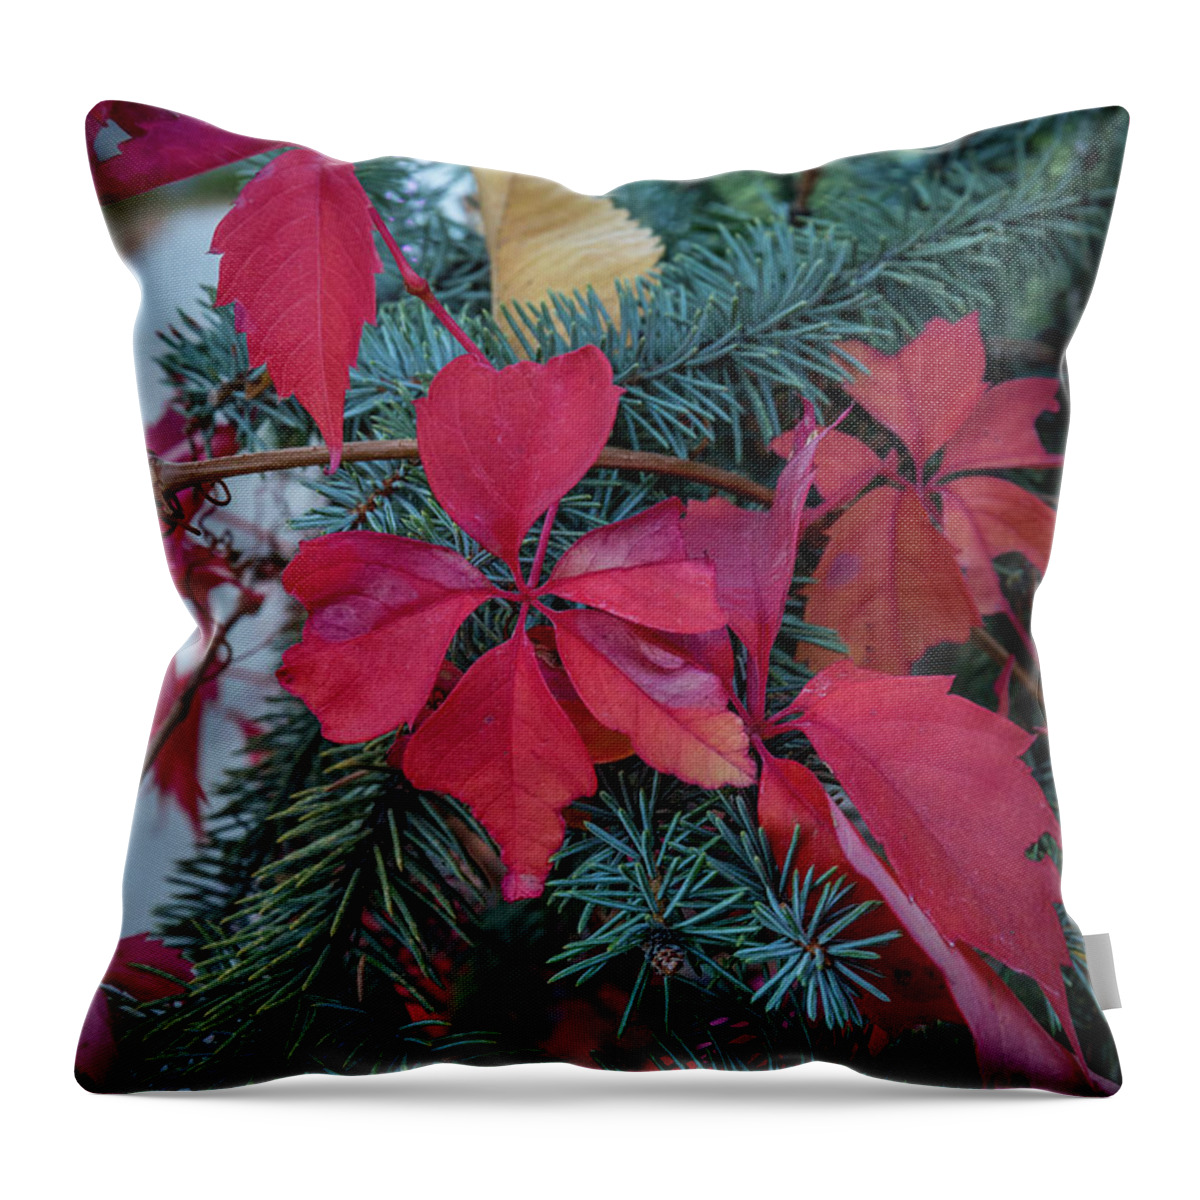 Fall Colors Throw Pillow featuring the photograph Reds, Yellows, and Blues by Aaron Burrows